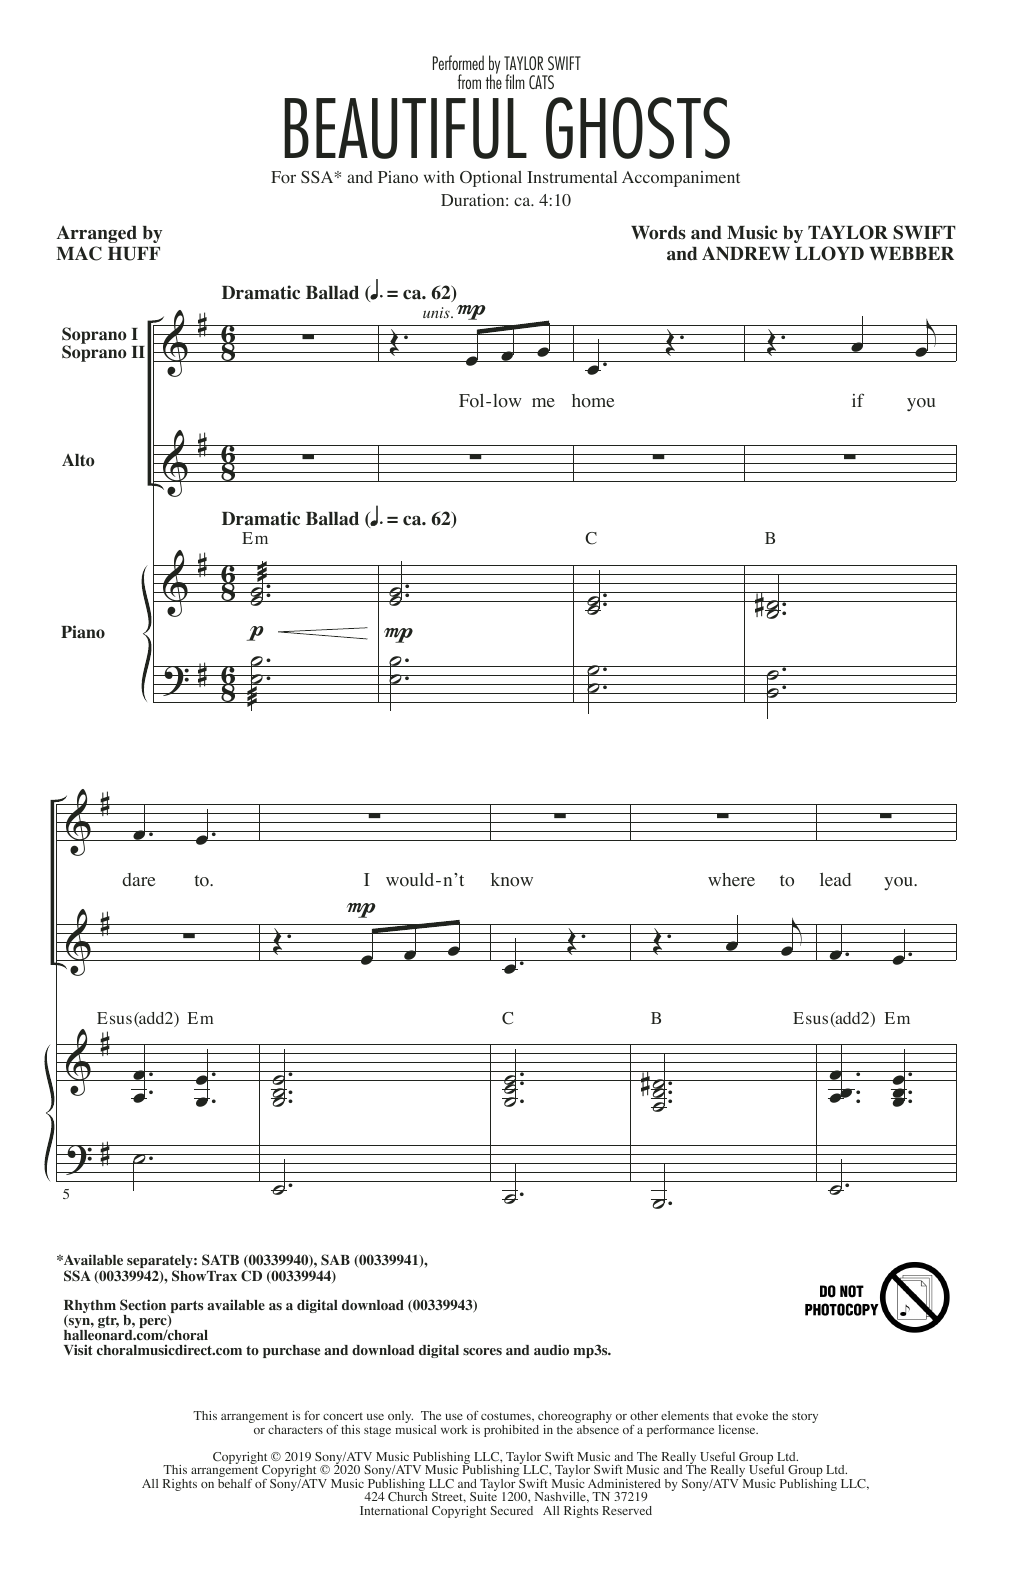 Download Taylor Swift Beautiful Ghosts (from the Motion Pictu Sheet Music